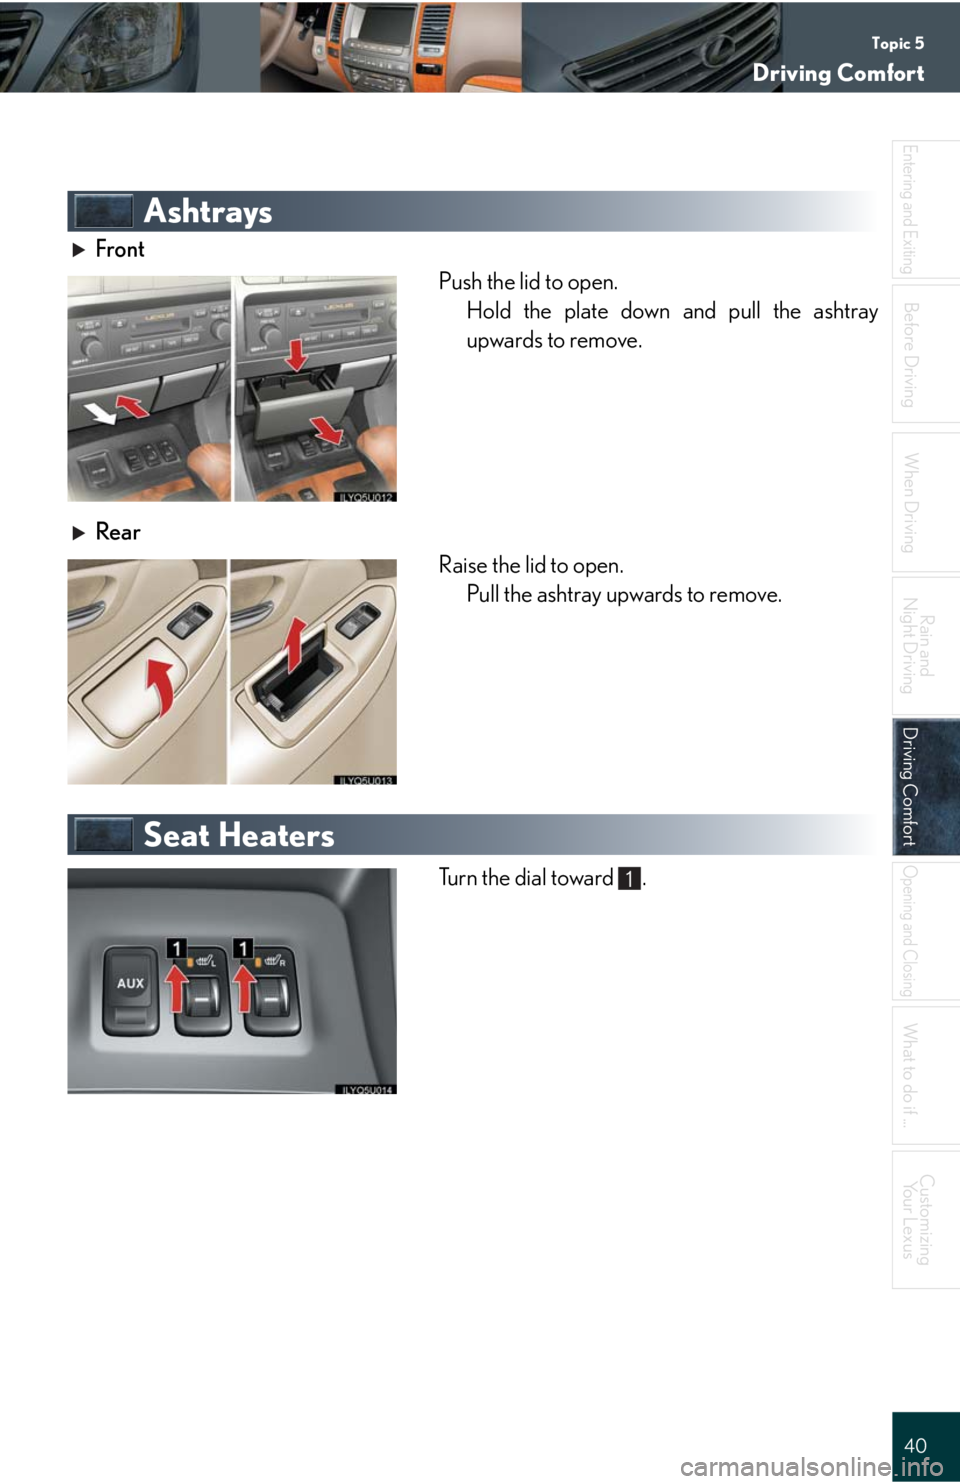 Lexus GX470 2008  Using other driving systems / LEXUS 2008 GX470 QUICK GUIDE OWNERS MANUAL (OM60D81U) Topic 5
Driving Comfort
40
Entering and Exiting
When Driving
Rain and 
Night Driving
Driving ComfortDriving Comfort
Opening and Closing
What to do if ...
Customizing
Yo u r  L e x u s
Before Driving
A